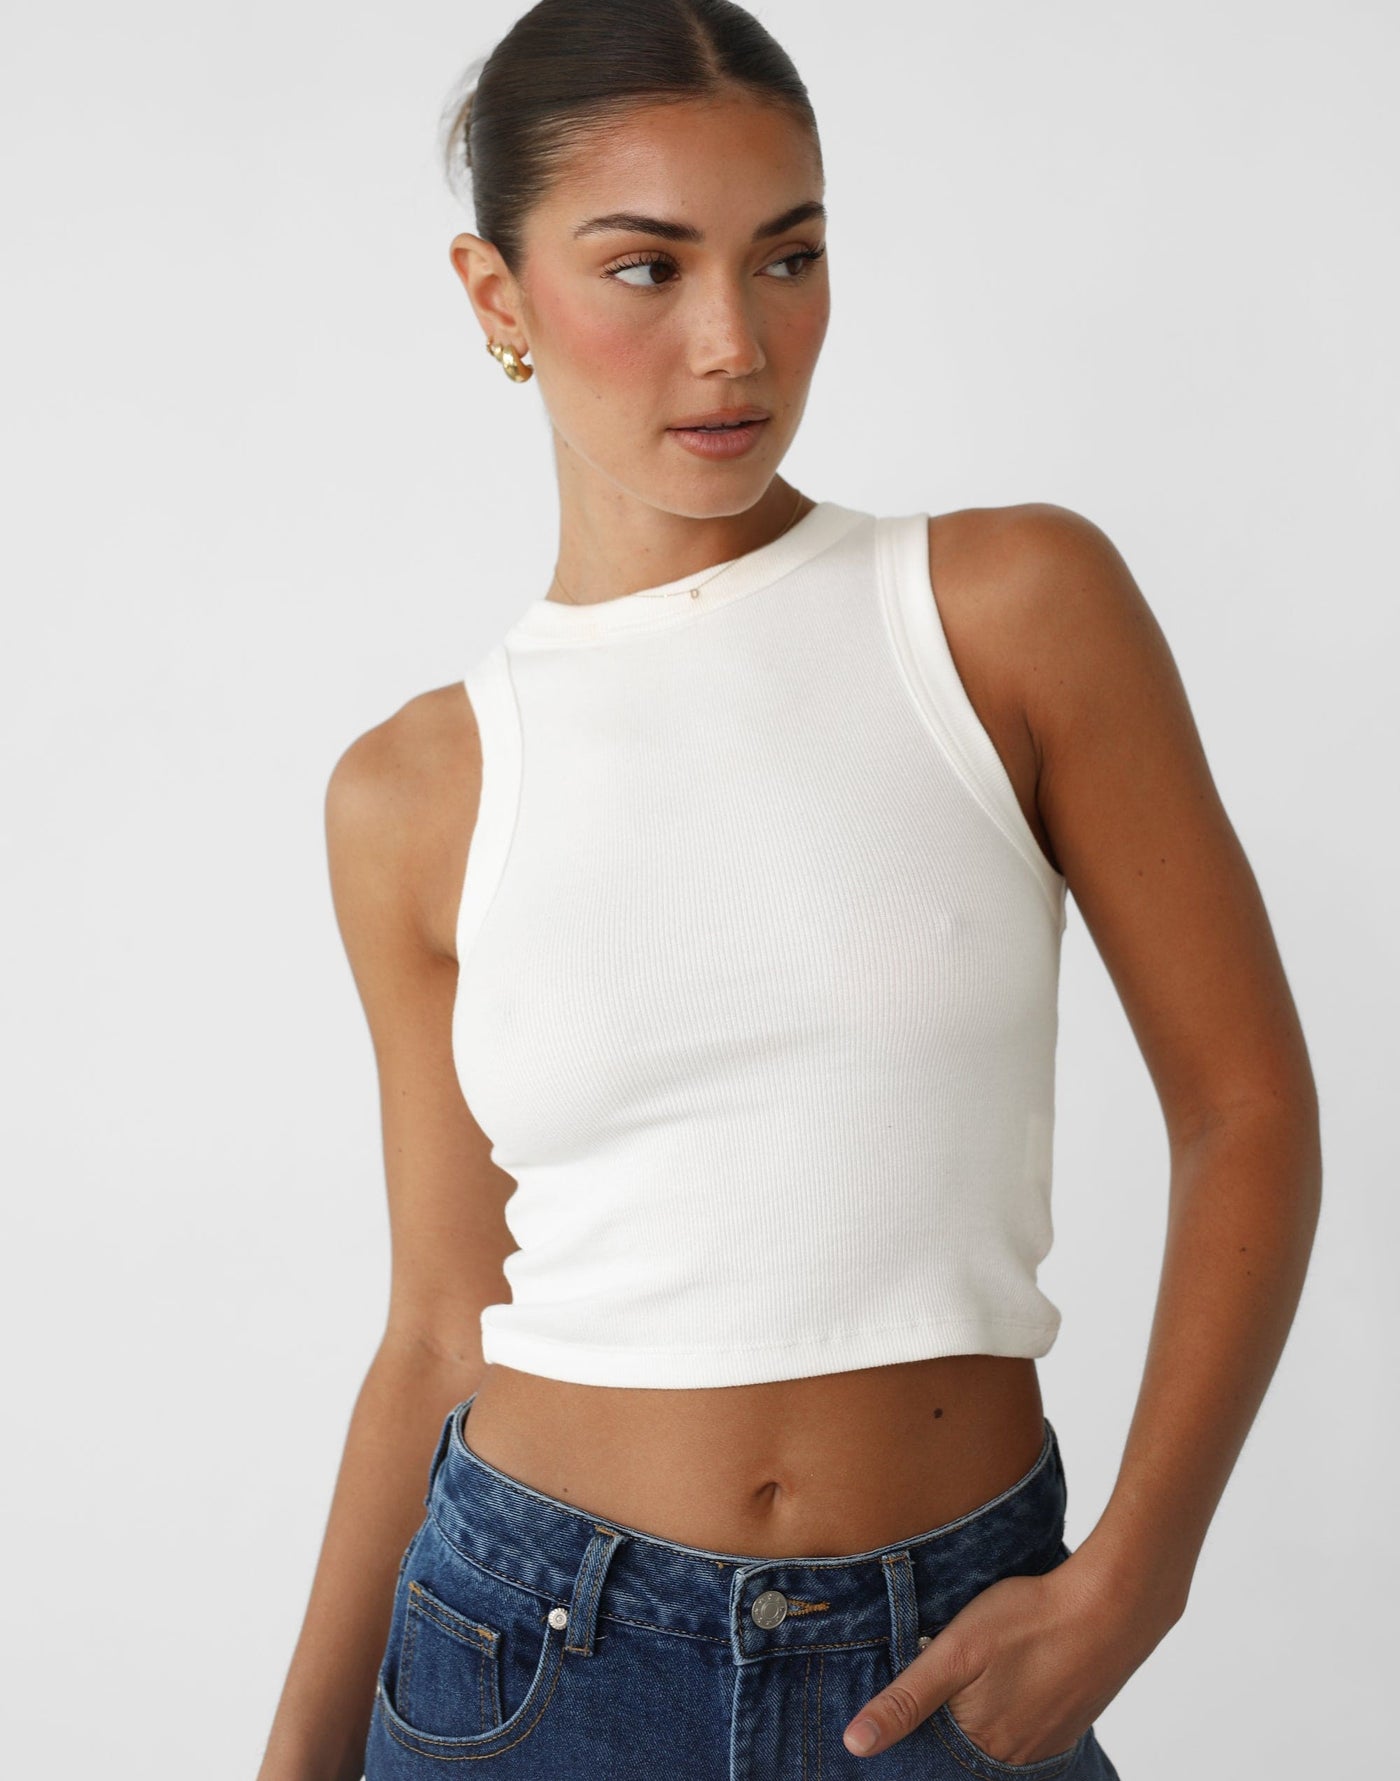 Lia Tank Top (White) - Basic Ribbed High Neck Top - Women's Top - Charcoal Clothing